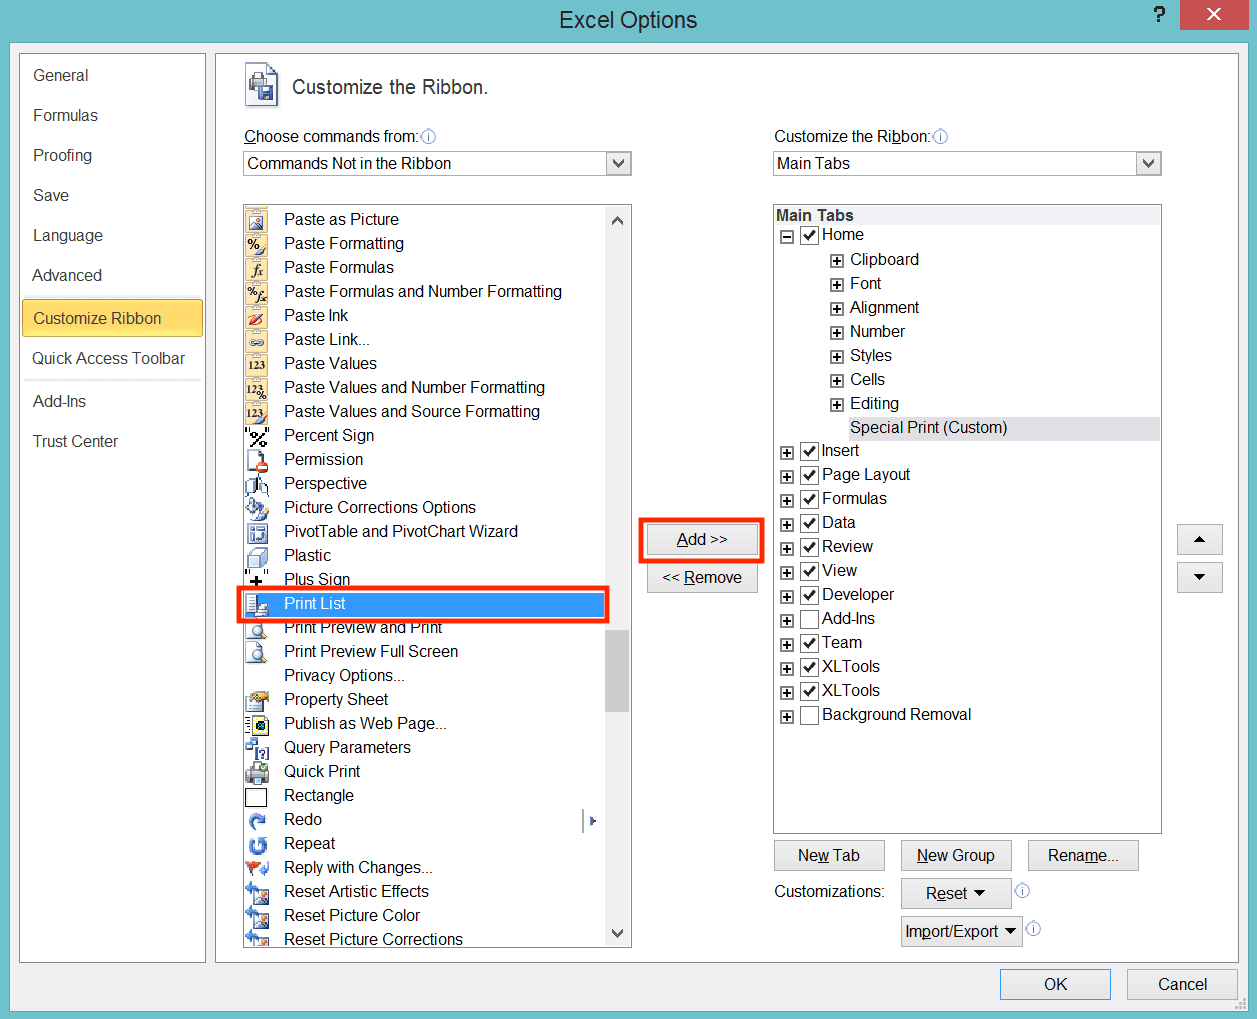 How to Make a Table in Excel - Screenshot of the Print List and Add >> Buttons Locations in the Customize the Ribbon Dialog Box 